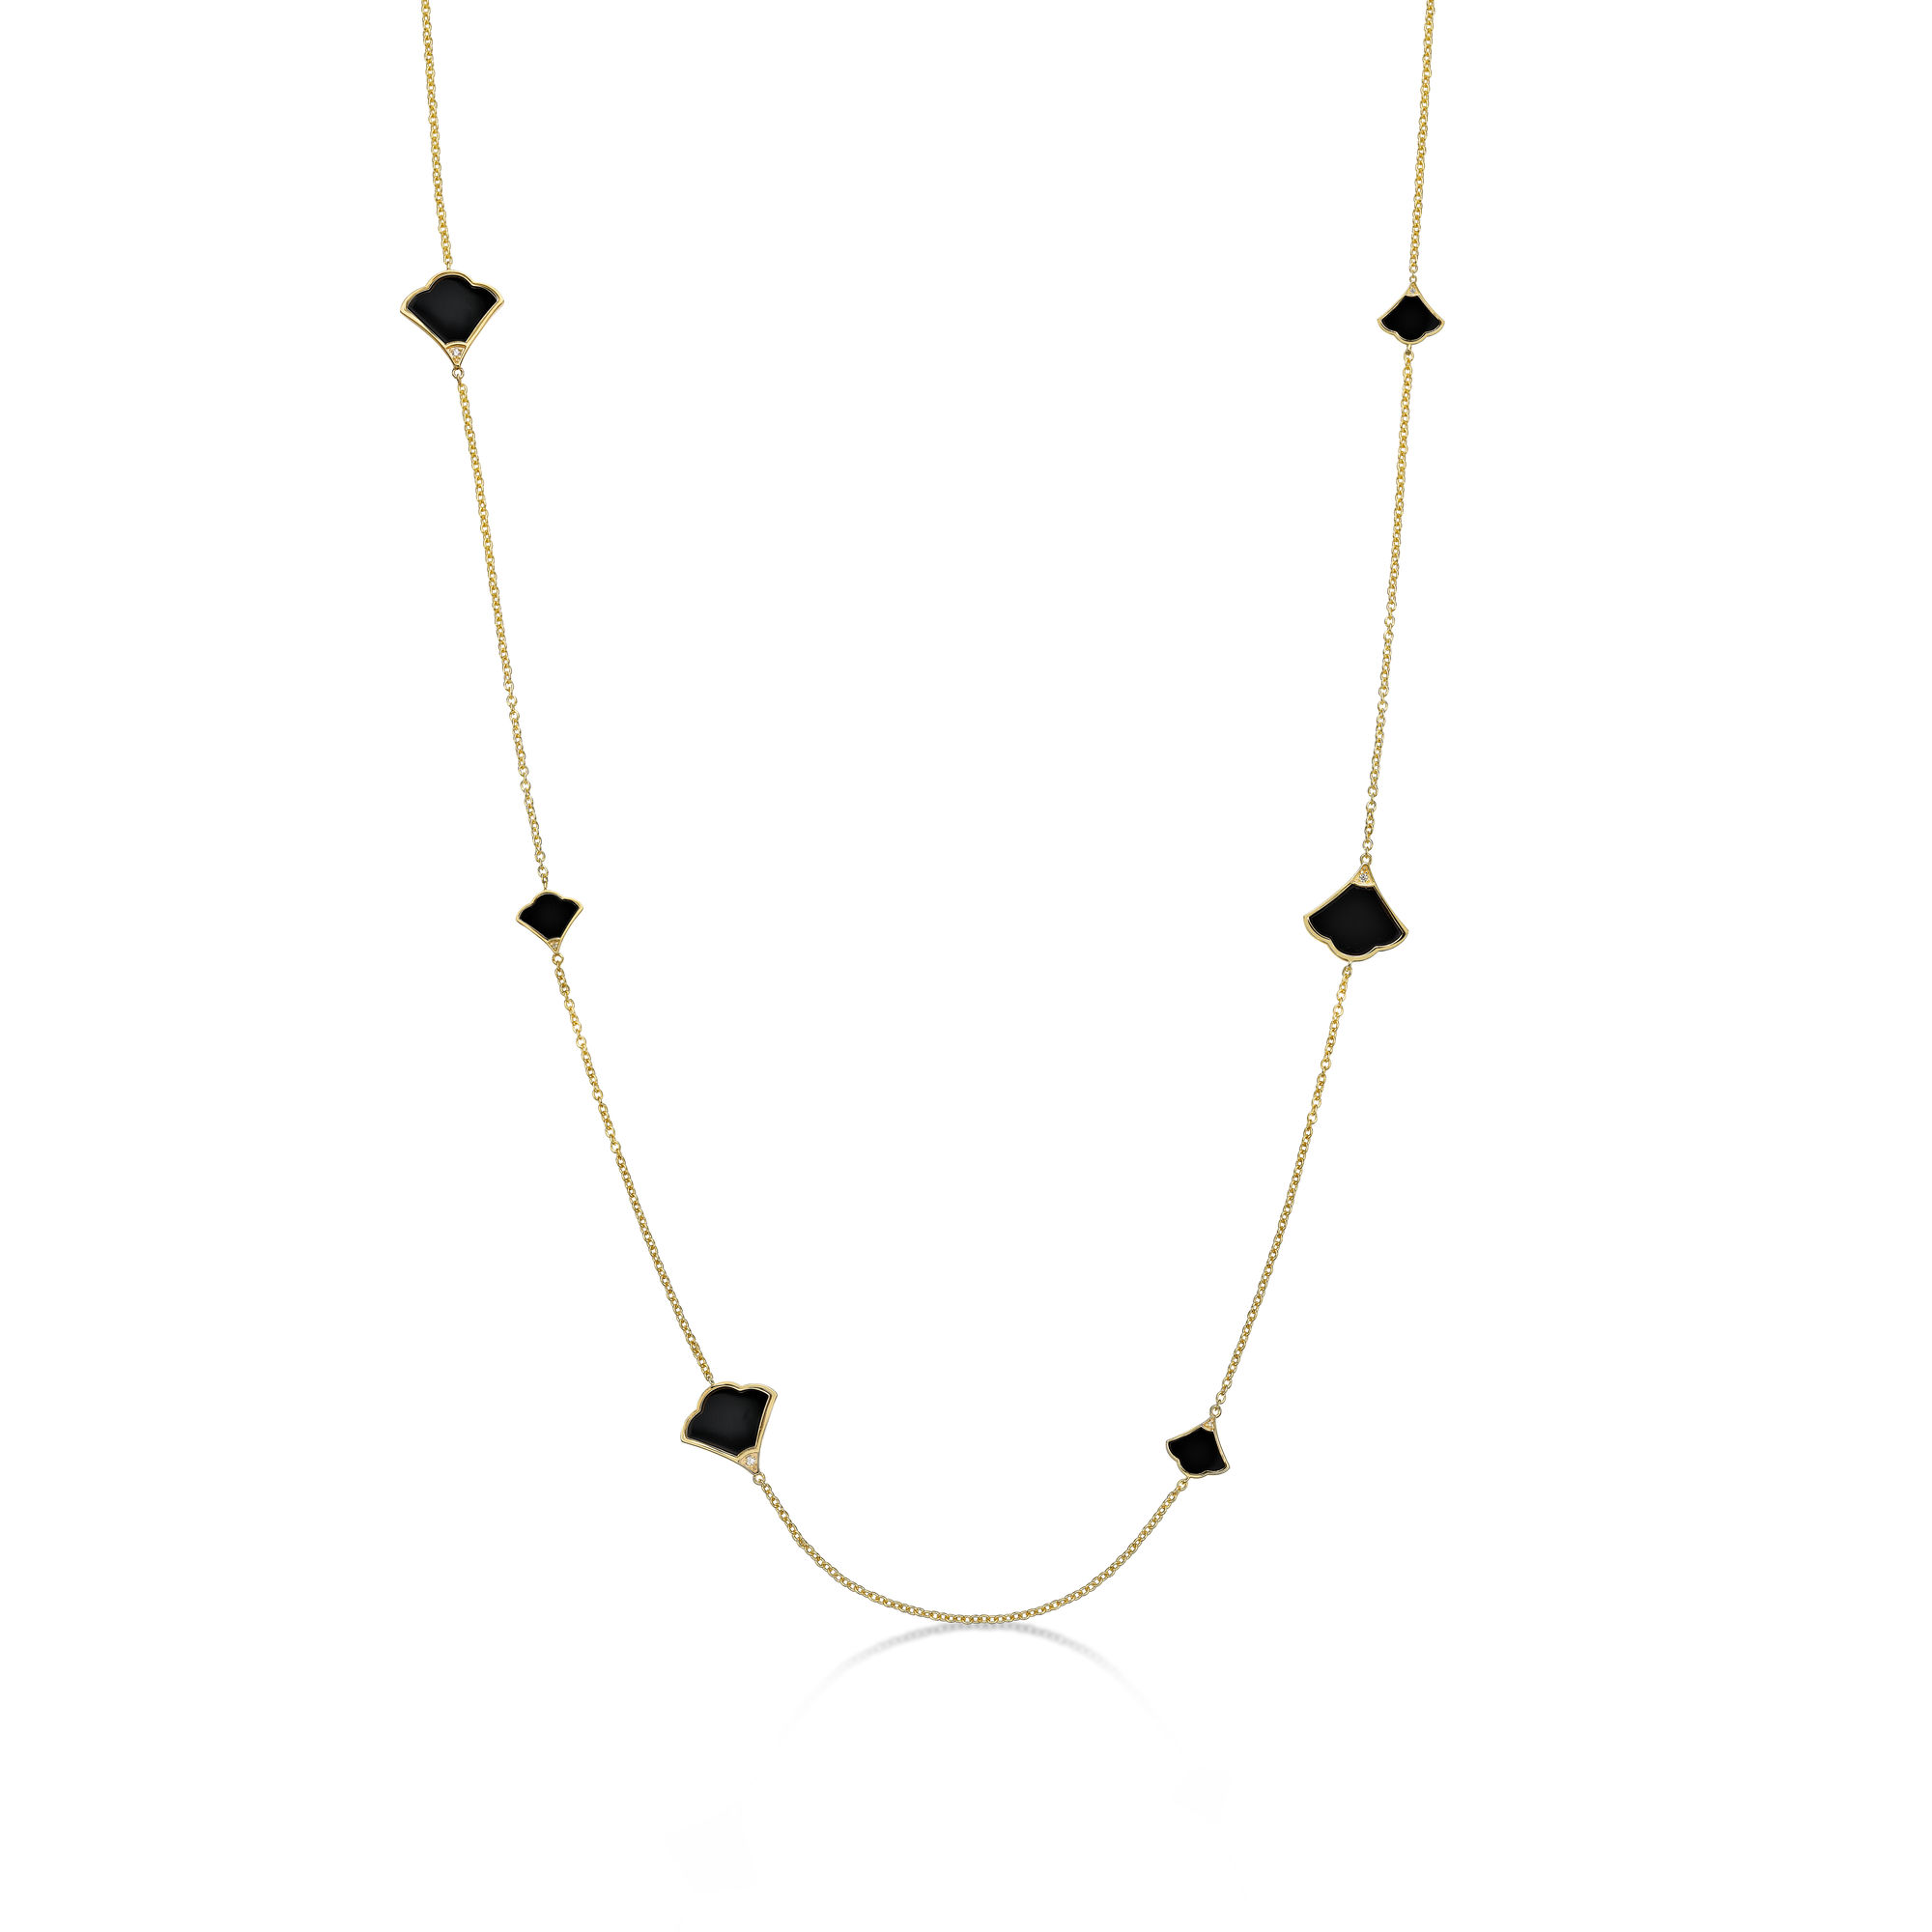 Women's Black Onyx Fan Necklace with Yellow Gold Plating and Lobster Clasp, 925 Sterling Silver, 32 Inches - Prima Donna | Lavari Jewelers